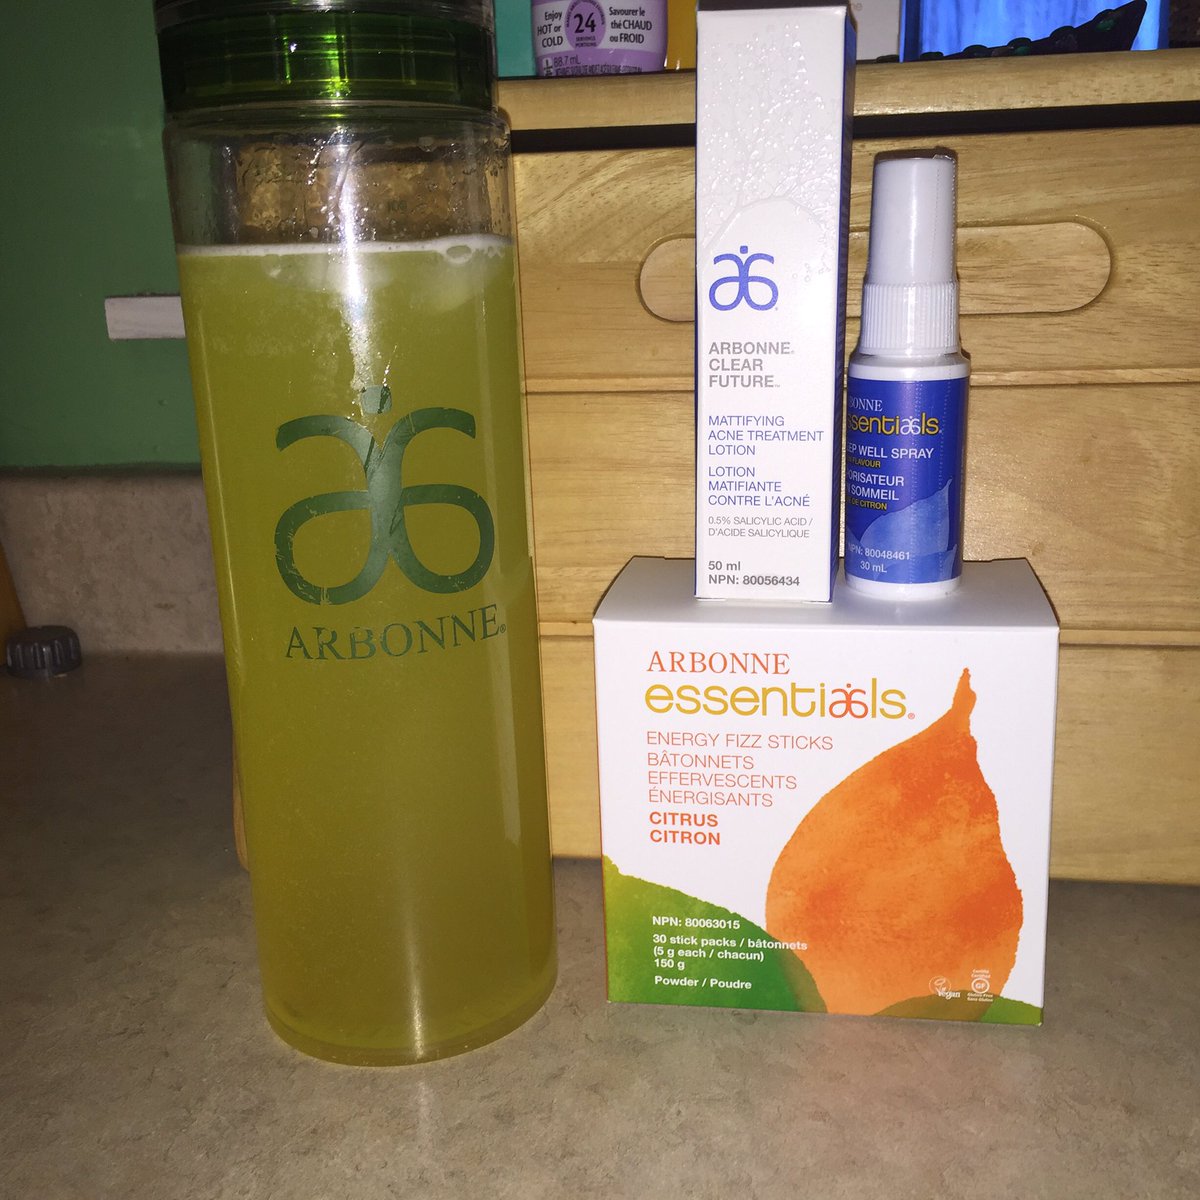 My Arbonne products.  #arbonne #energyfizzsticks #clearfuture #puresafebeneficial